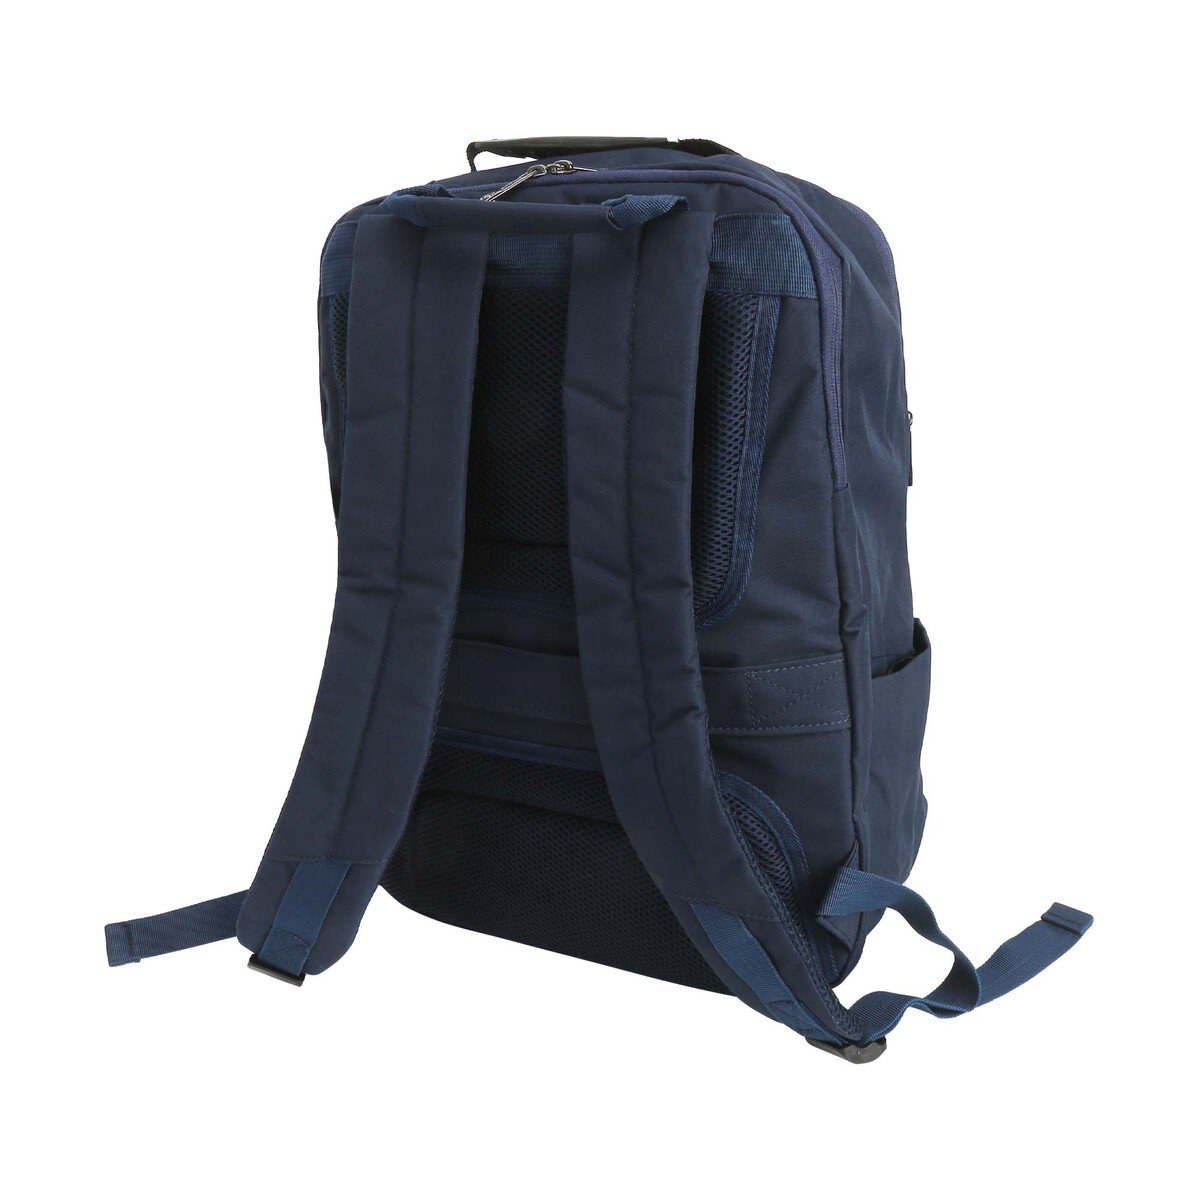 Wagon R Laptop Backpack BP-1778 Assorted